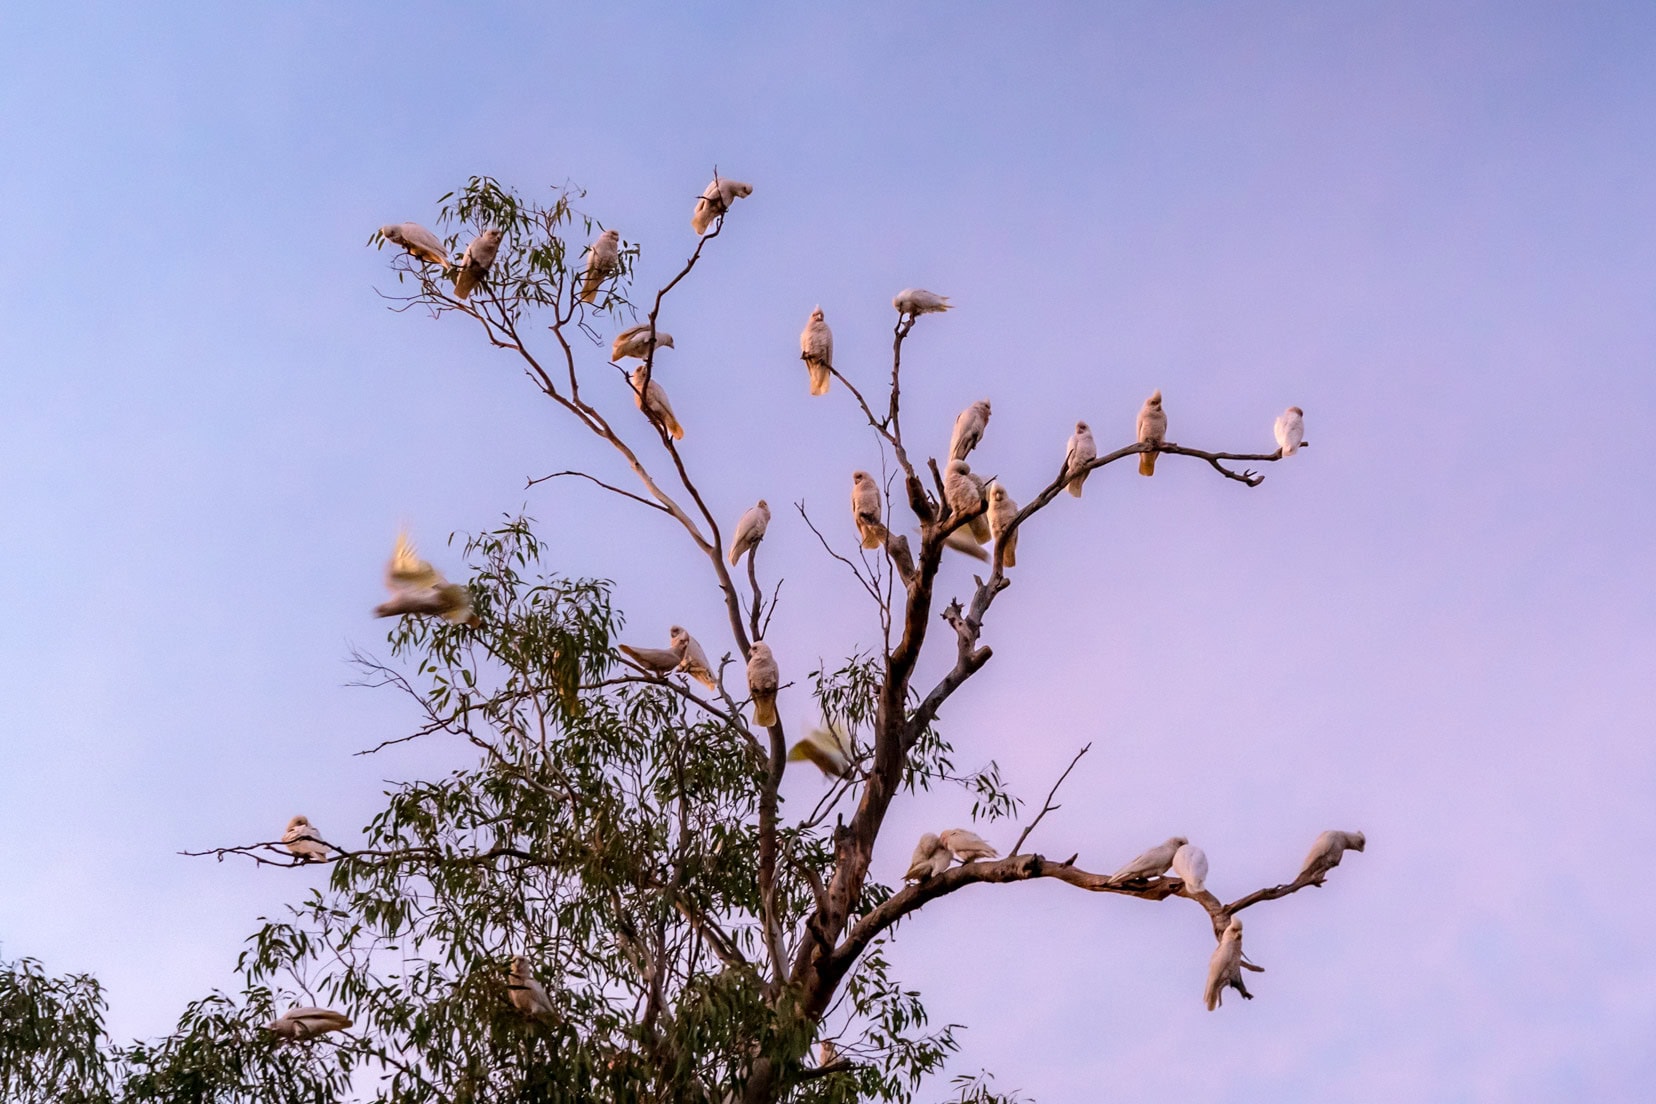 York-overnight-and-cockatoos in a tree